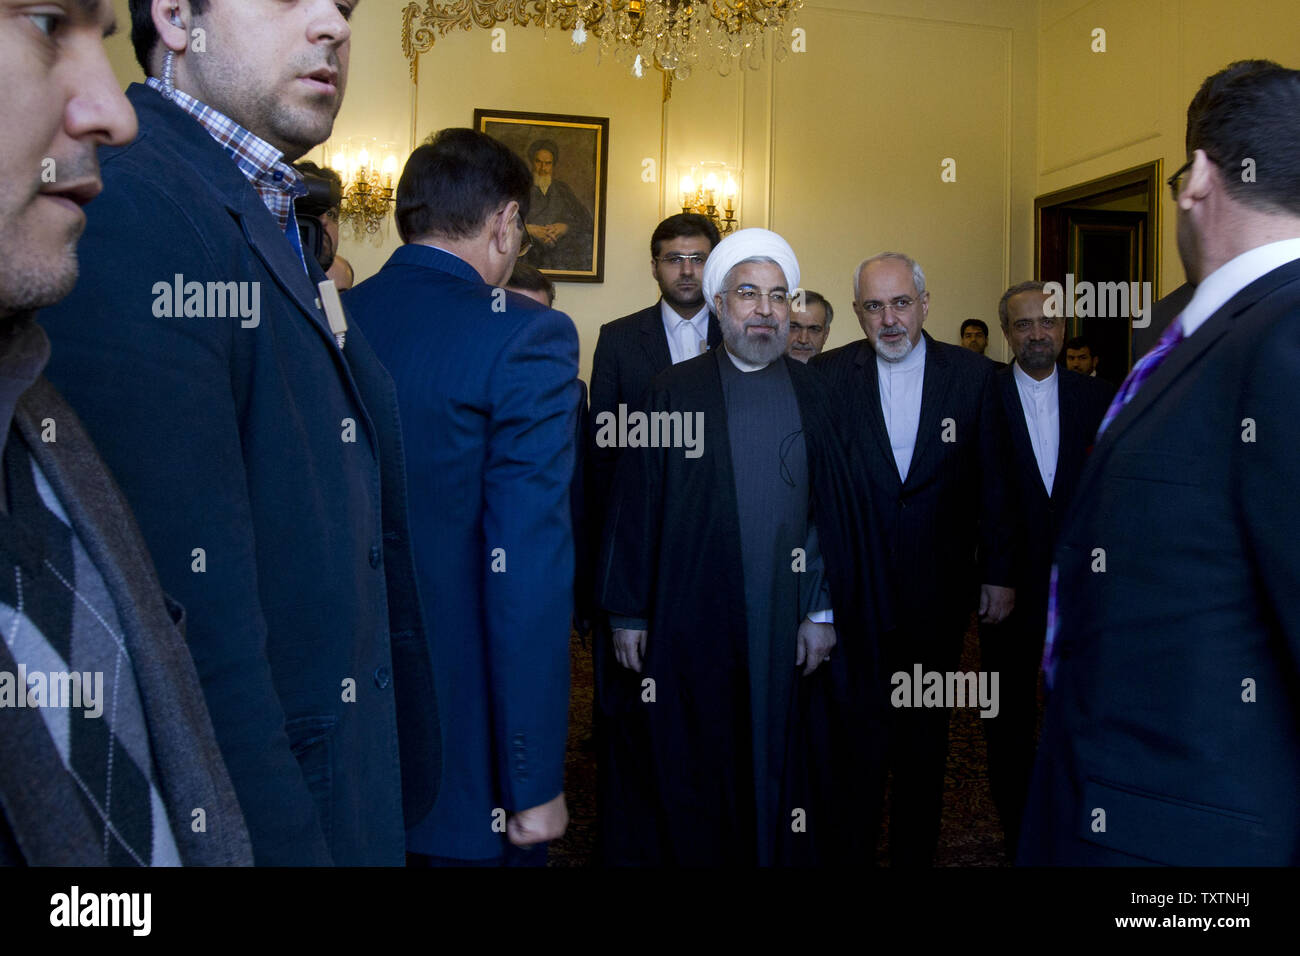 Iranian President Hassan Rouhani stands next to Iran's Foreign Minister Mohammad Javad Zarif (R) prior to the arrival of Turkish Prime Minister Recep Tayyip Erdogan (Not pictured) in Tehran, Iran on January 29, 2014. Erdogan arrived in Tehran at the head of a high-ranking delegation to discuss key bilateral and regional issues with senior Iranian officials.     UPI/Maryam Rahmanian Stock Photo